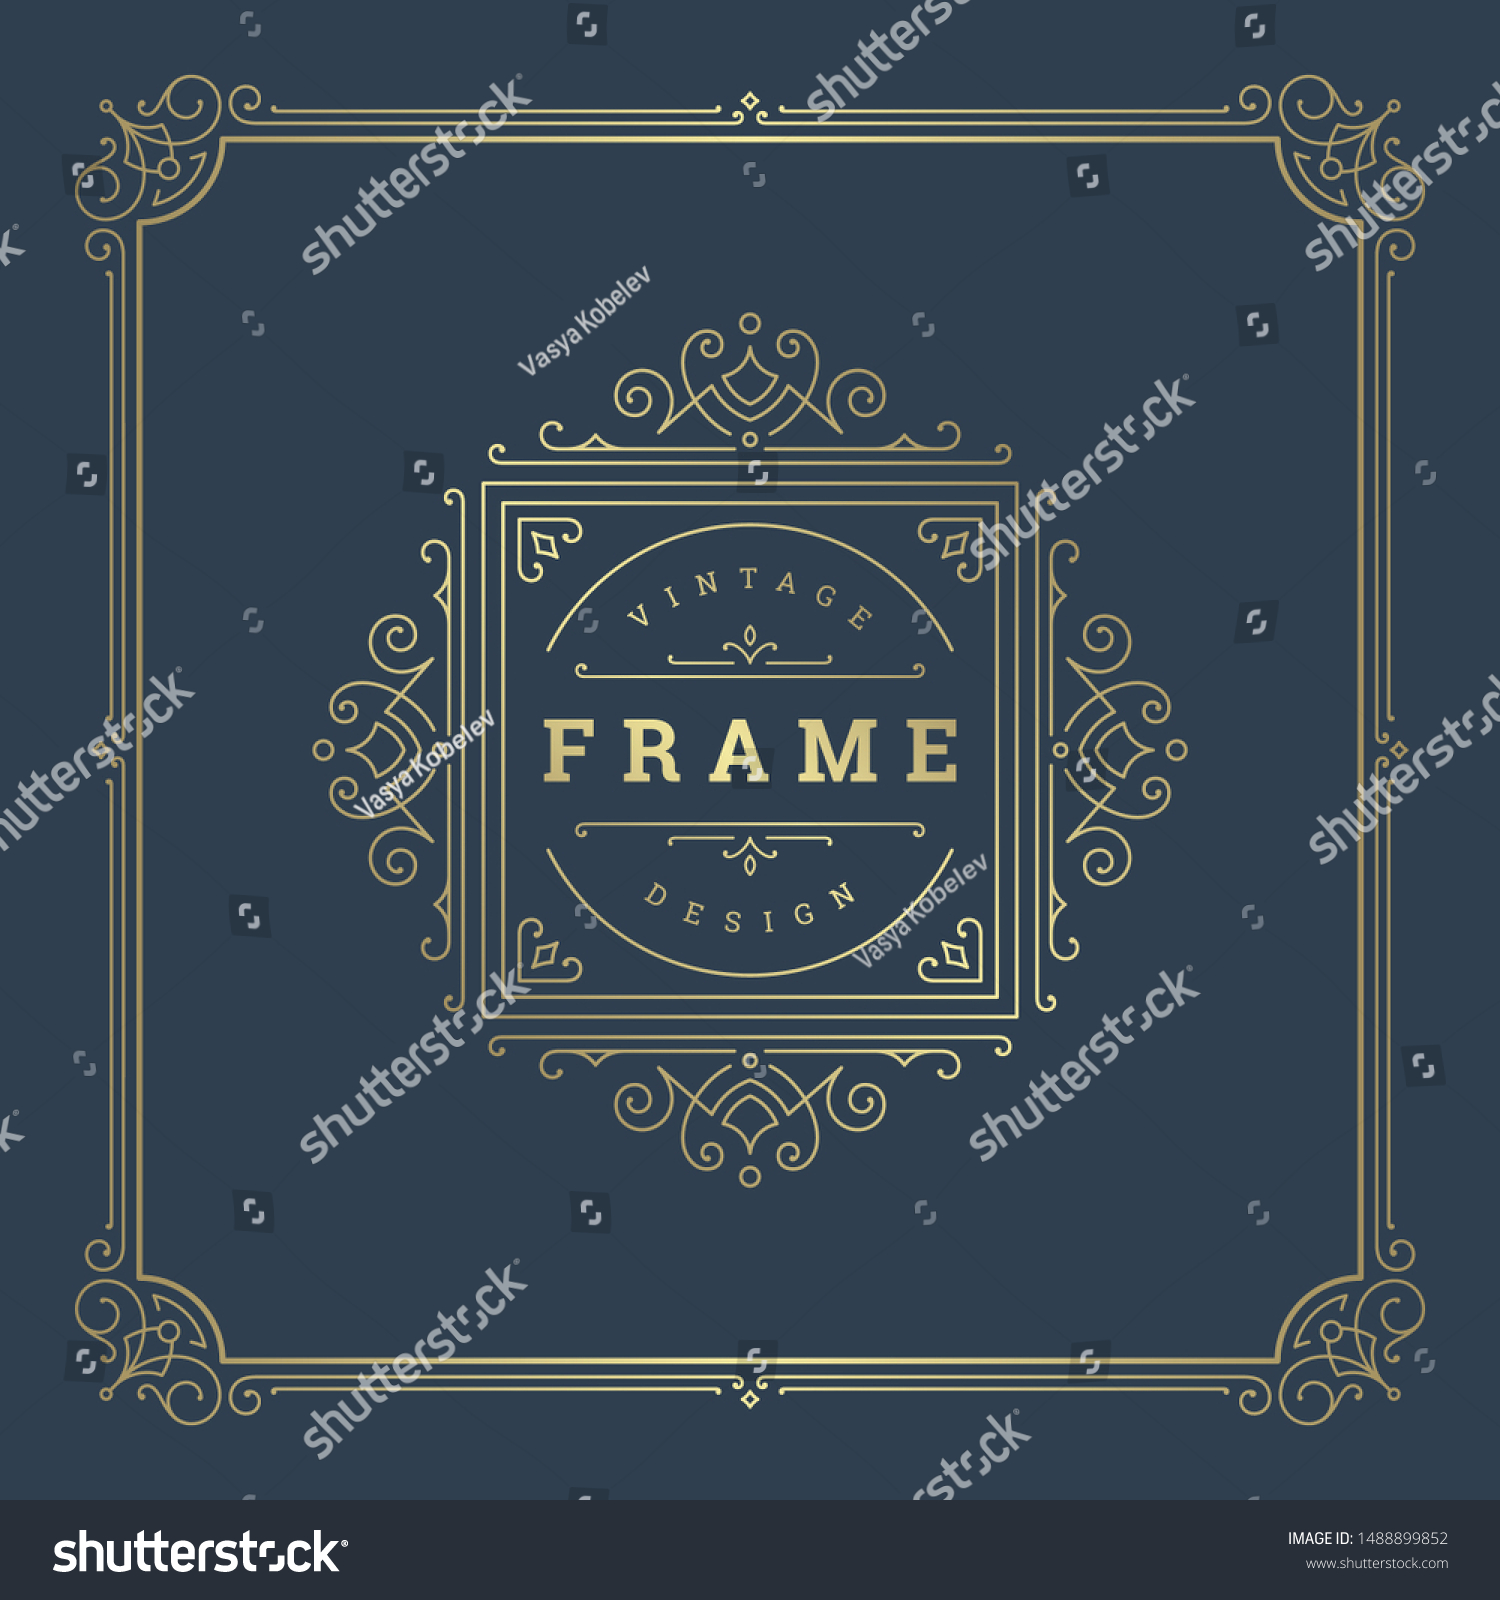 Vintage flourishes ornament swirls lines frame template vector illustration victorian ornate border for greeting cards, wedding invitations, advertising or other design and place for text. #1488899852